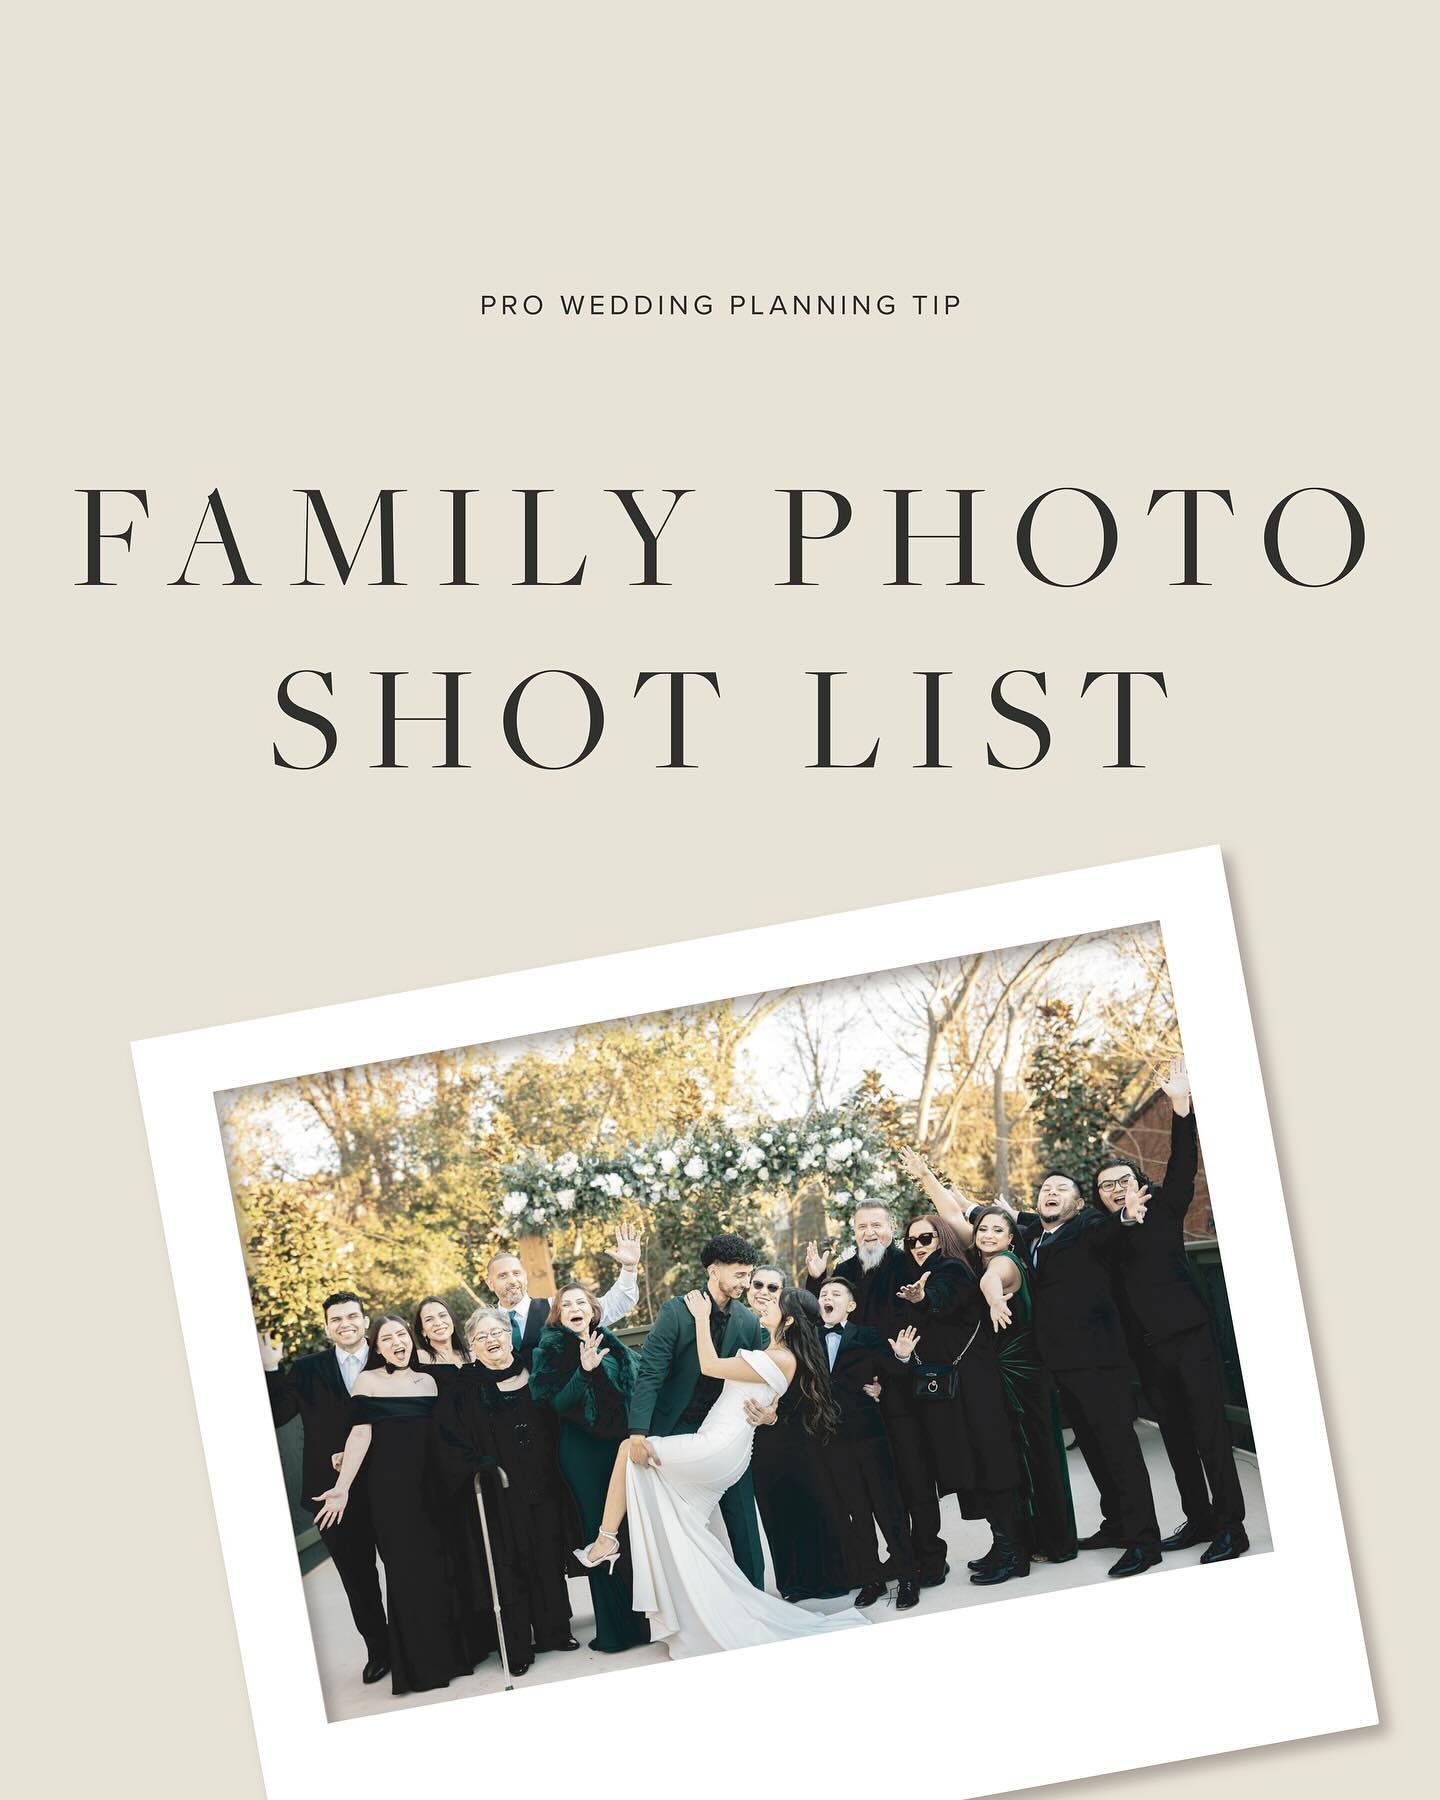 &ldquo;Why You Need a Family Photo List for Your Wedding Photographer&rdquo;

Your wedding day is a whirlwind of emotions, laughter, and love. While your wedding photographer is skilled at capturing candid moments, having a family photo list can ensu